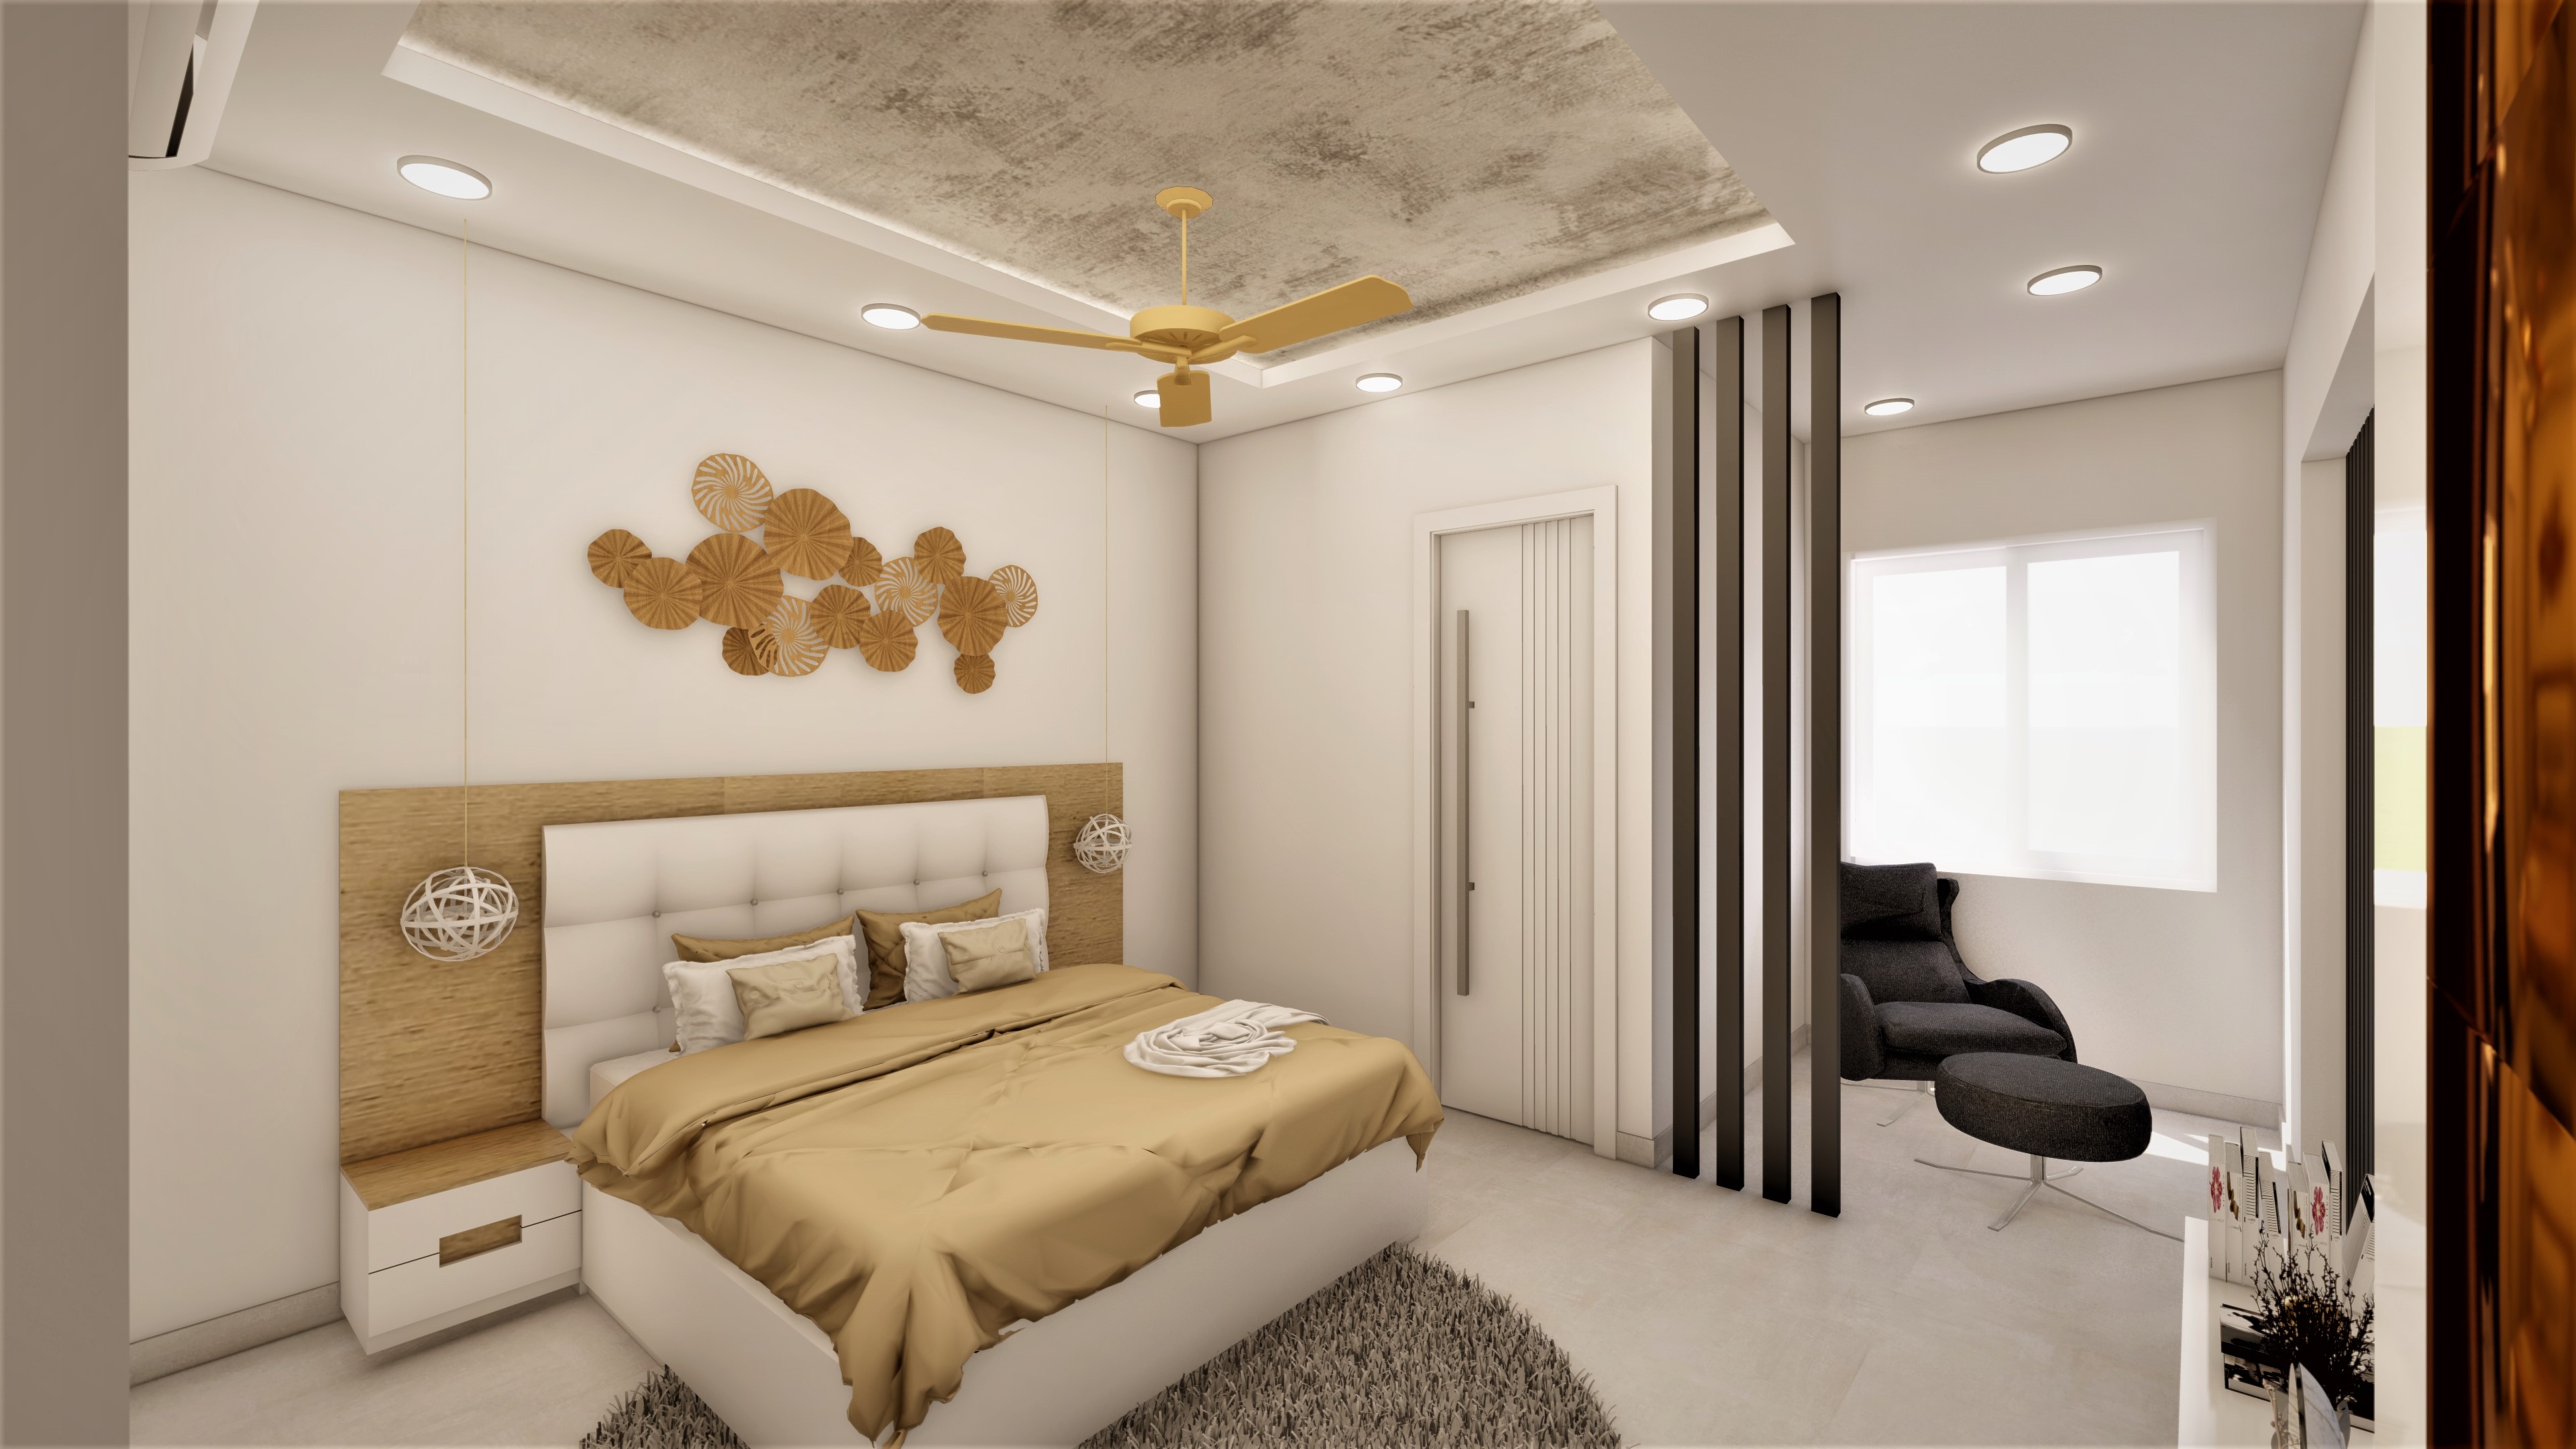 Bedroom Design With Ceiling